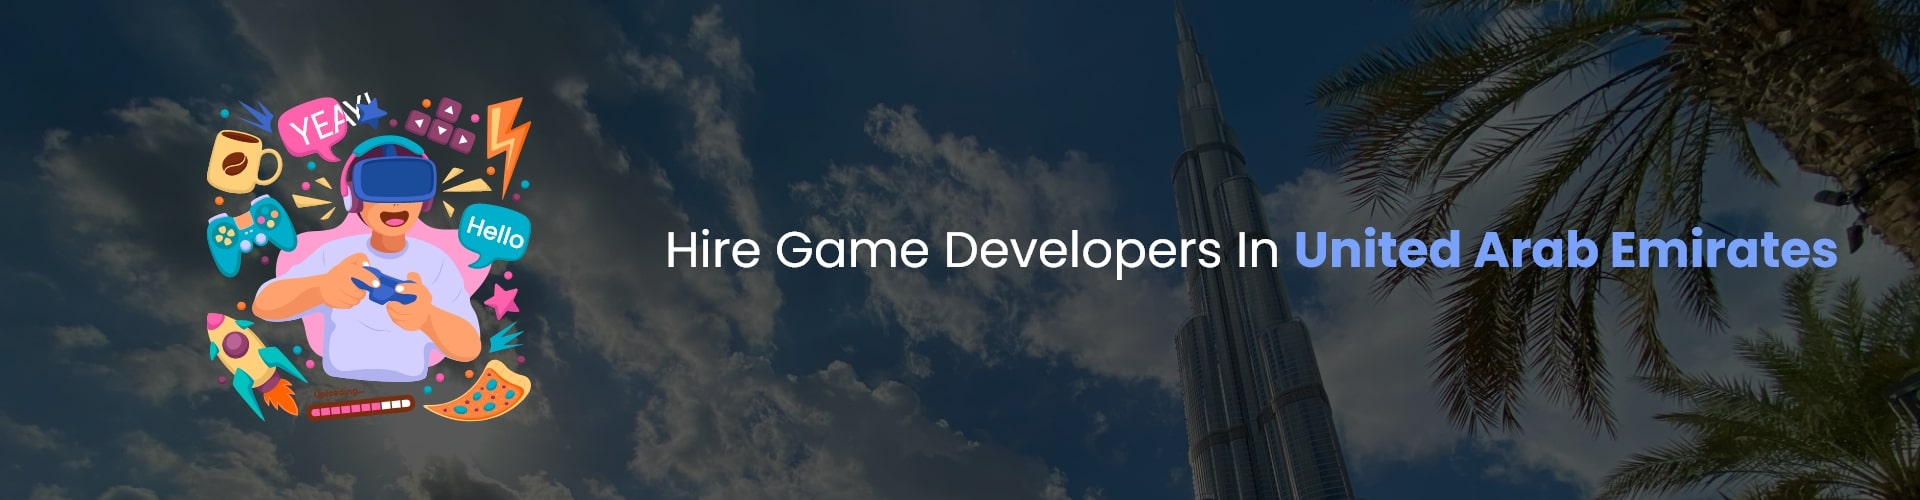 hire game developers in united arab emirates